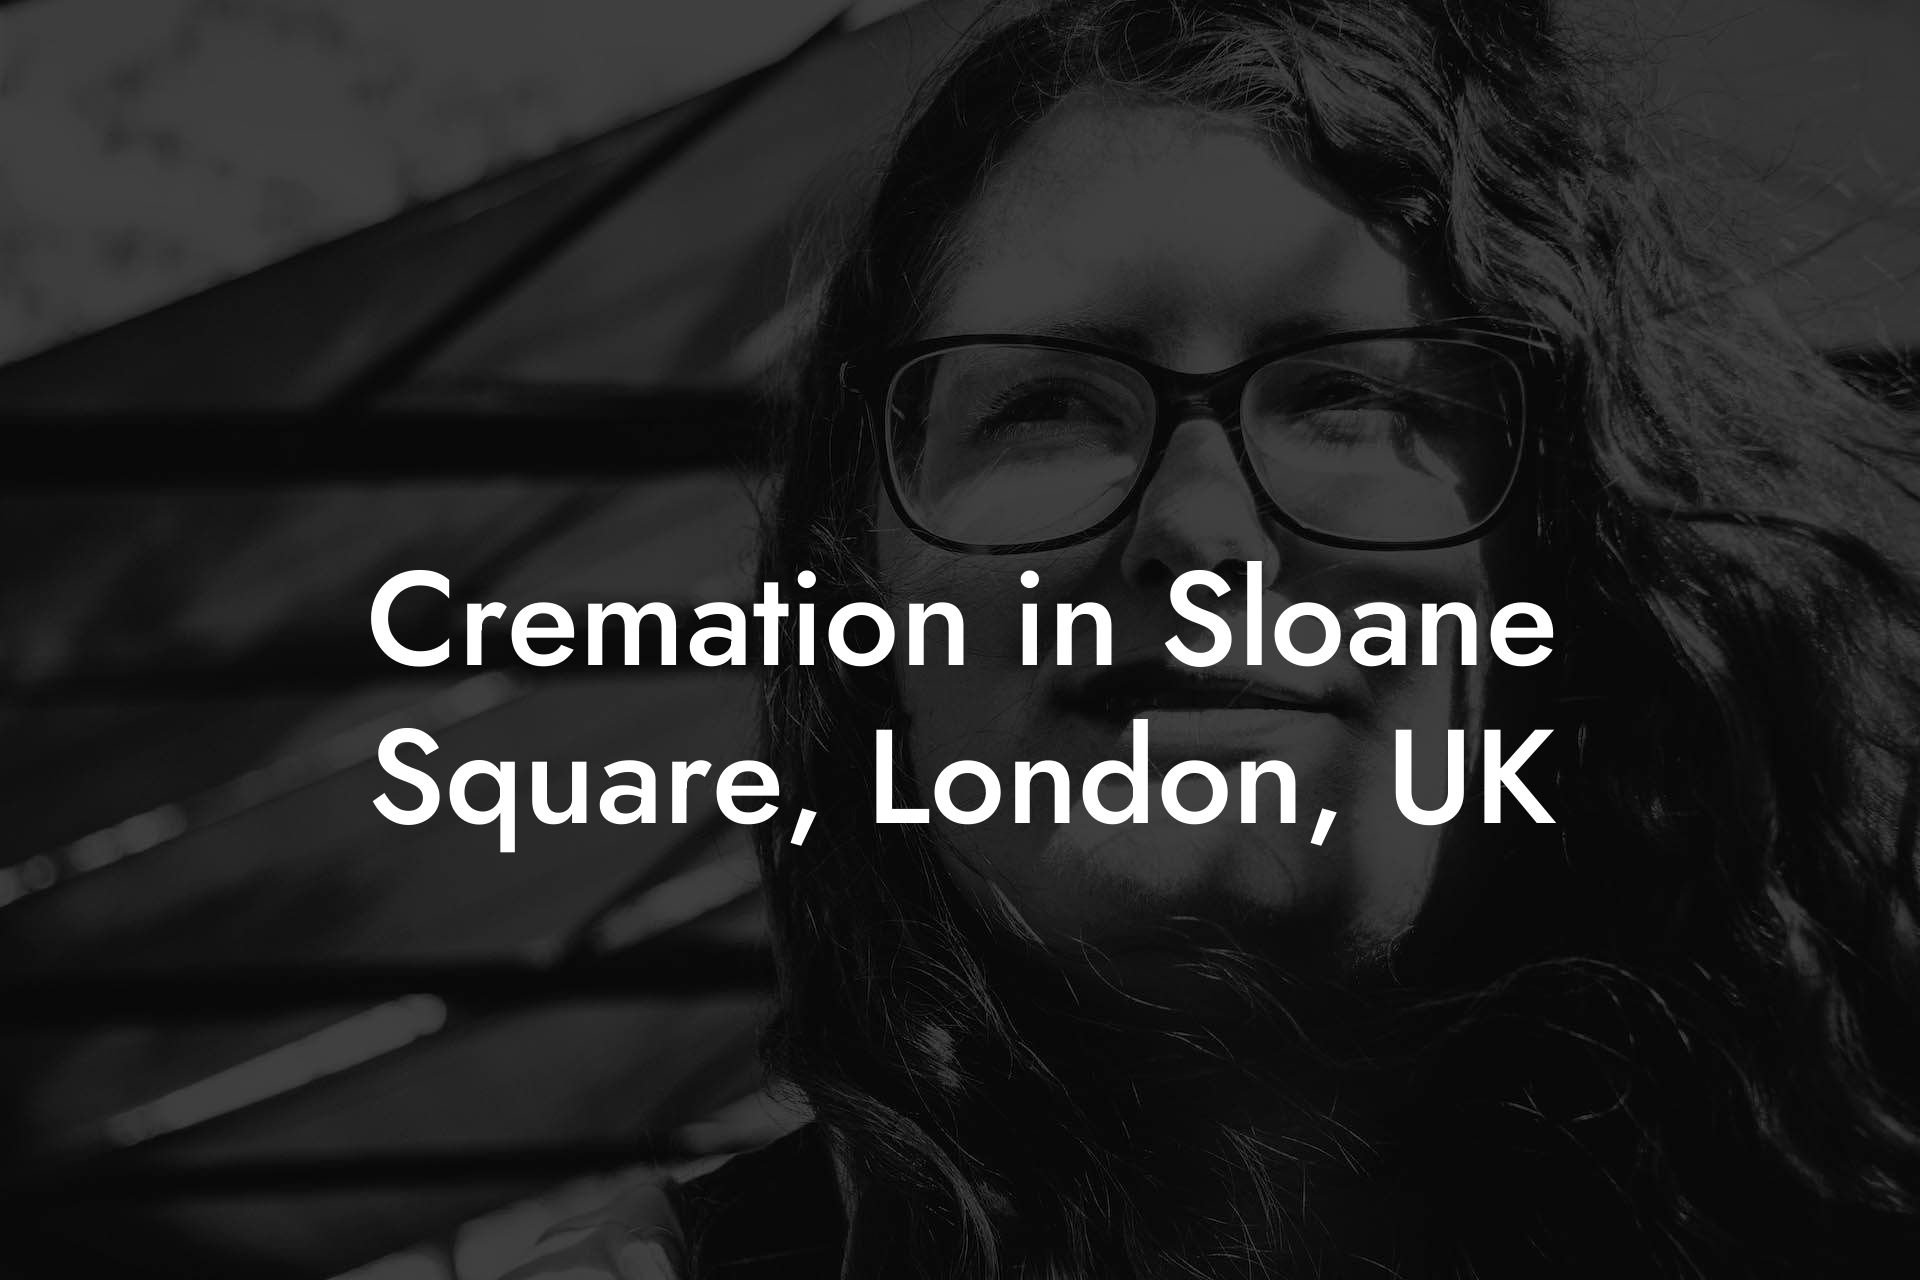 Cremation in Sloane Square, London, UK